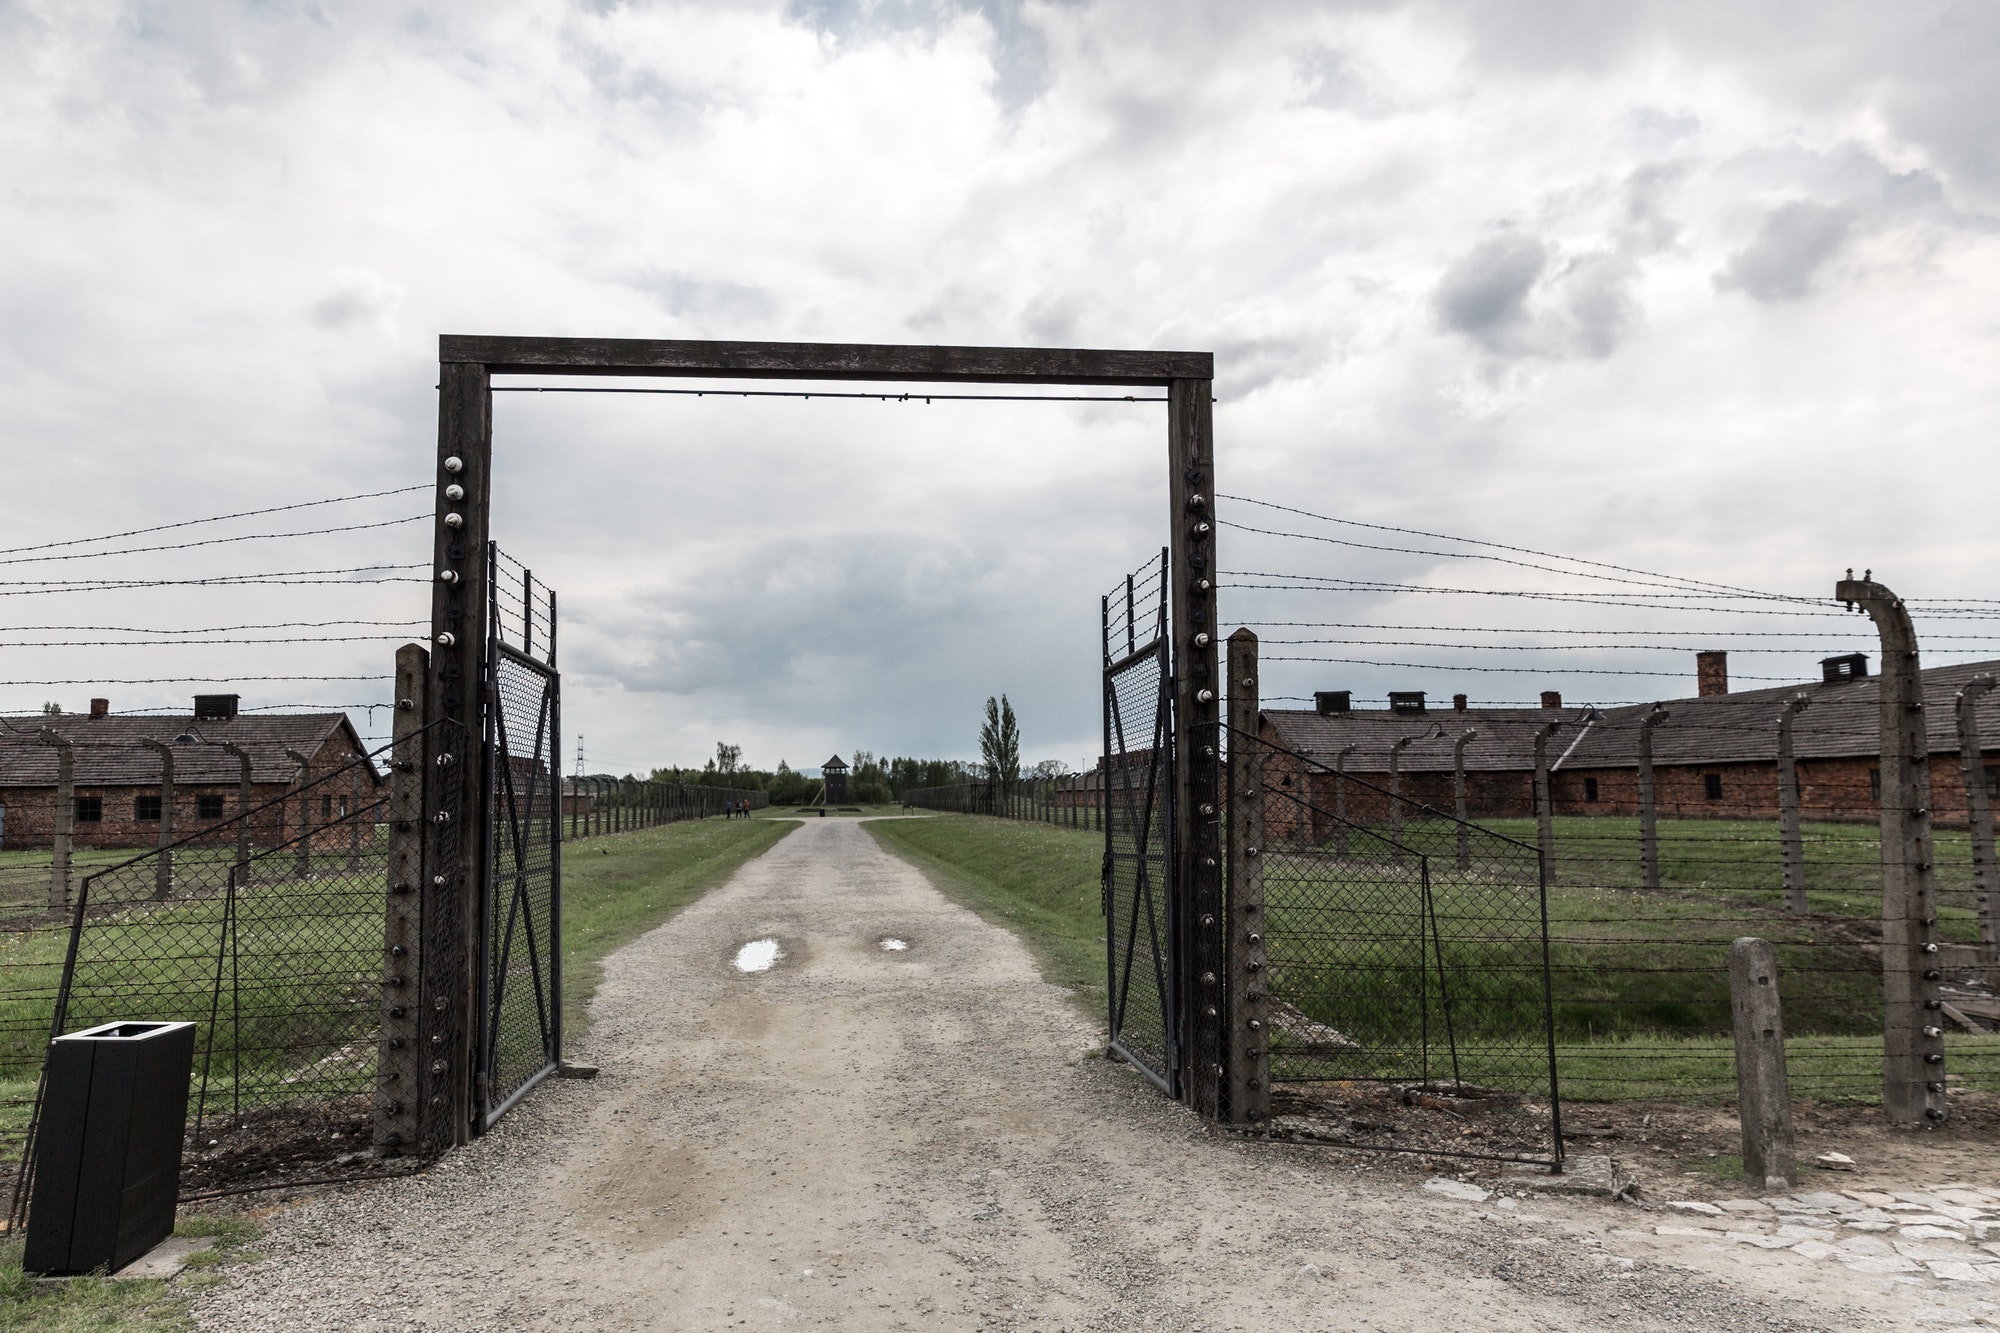 Gates and barbed wire fence, Auschwitz II